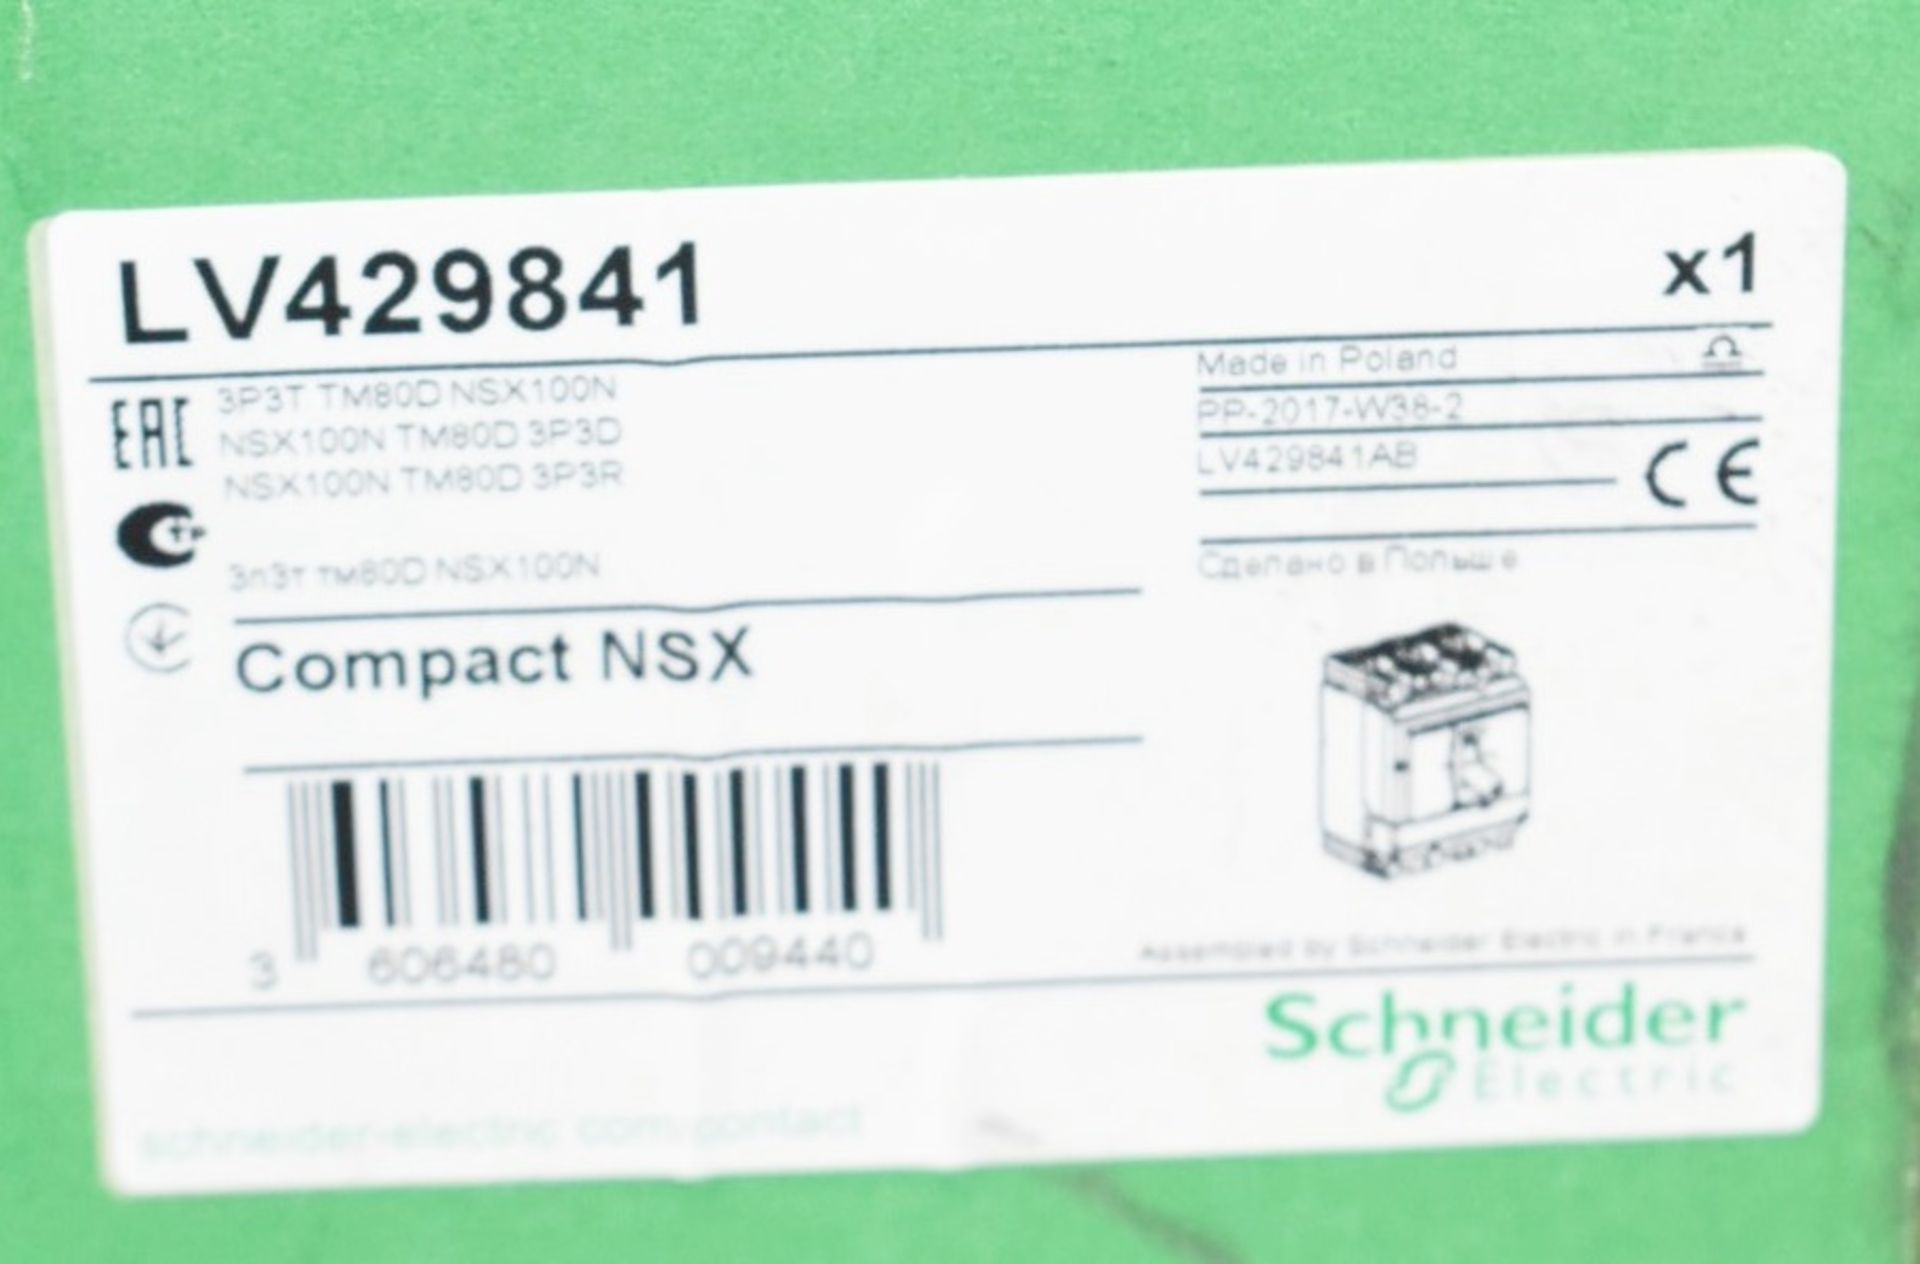 3 x Schneider Electric Circuit Breakers Type: LV429841 - ComPact NSX100N - New Stock - RRP £1,170 - Image 3 of 3